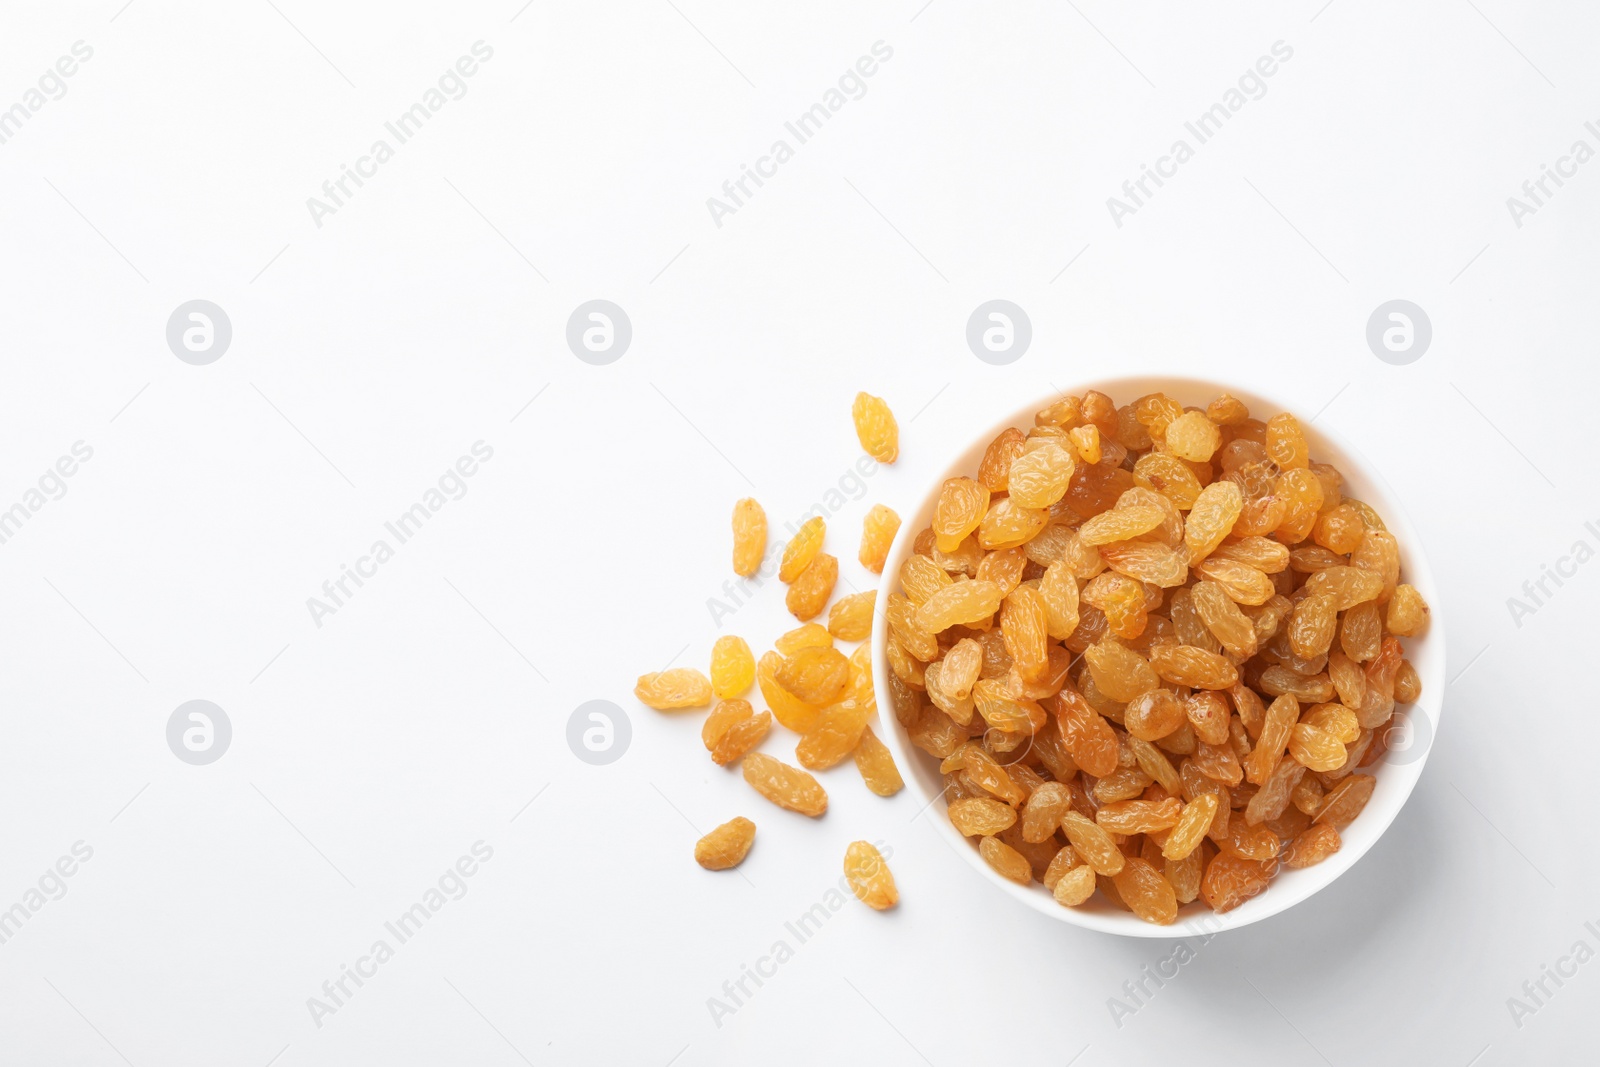 Photo of Bowl with raisins and space for text on white background, top view. Dried fruit as healthy snack